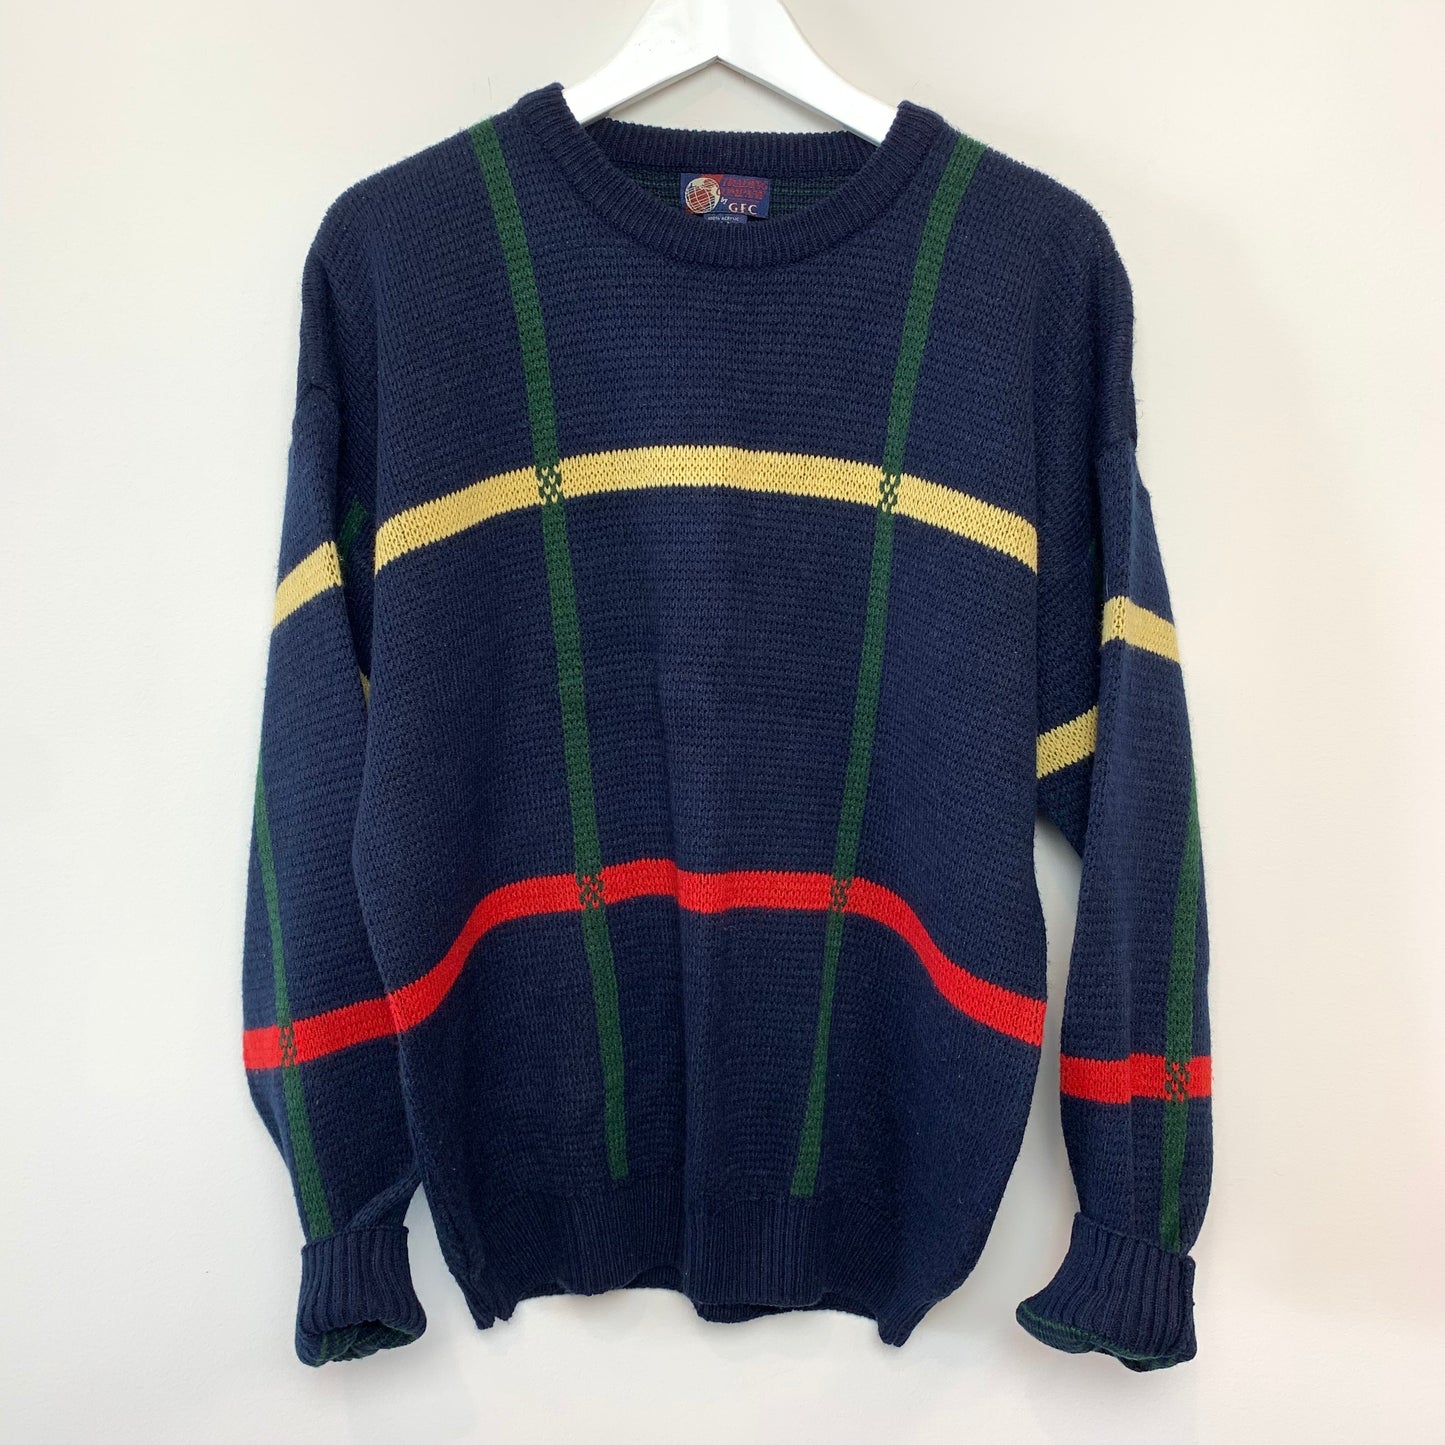 90s Trading Company by GFC Chunky Knit Grandpa Sweater Primary Colors Large